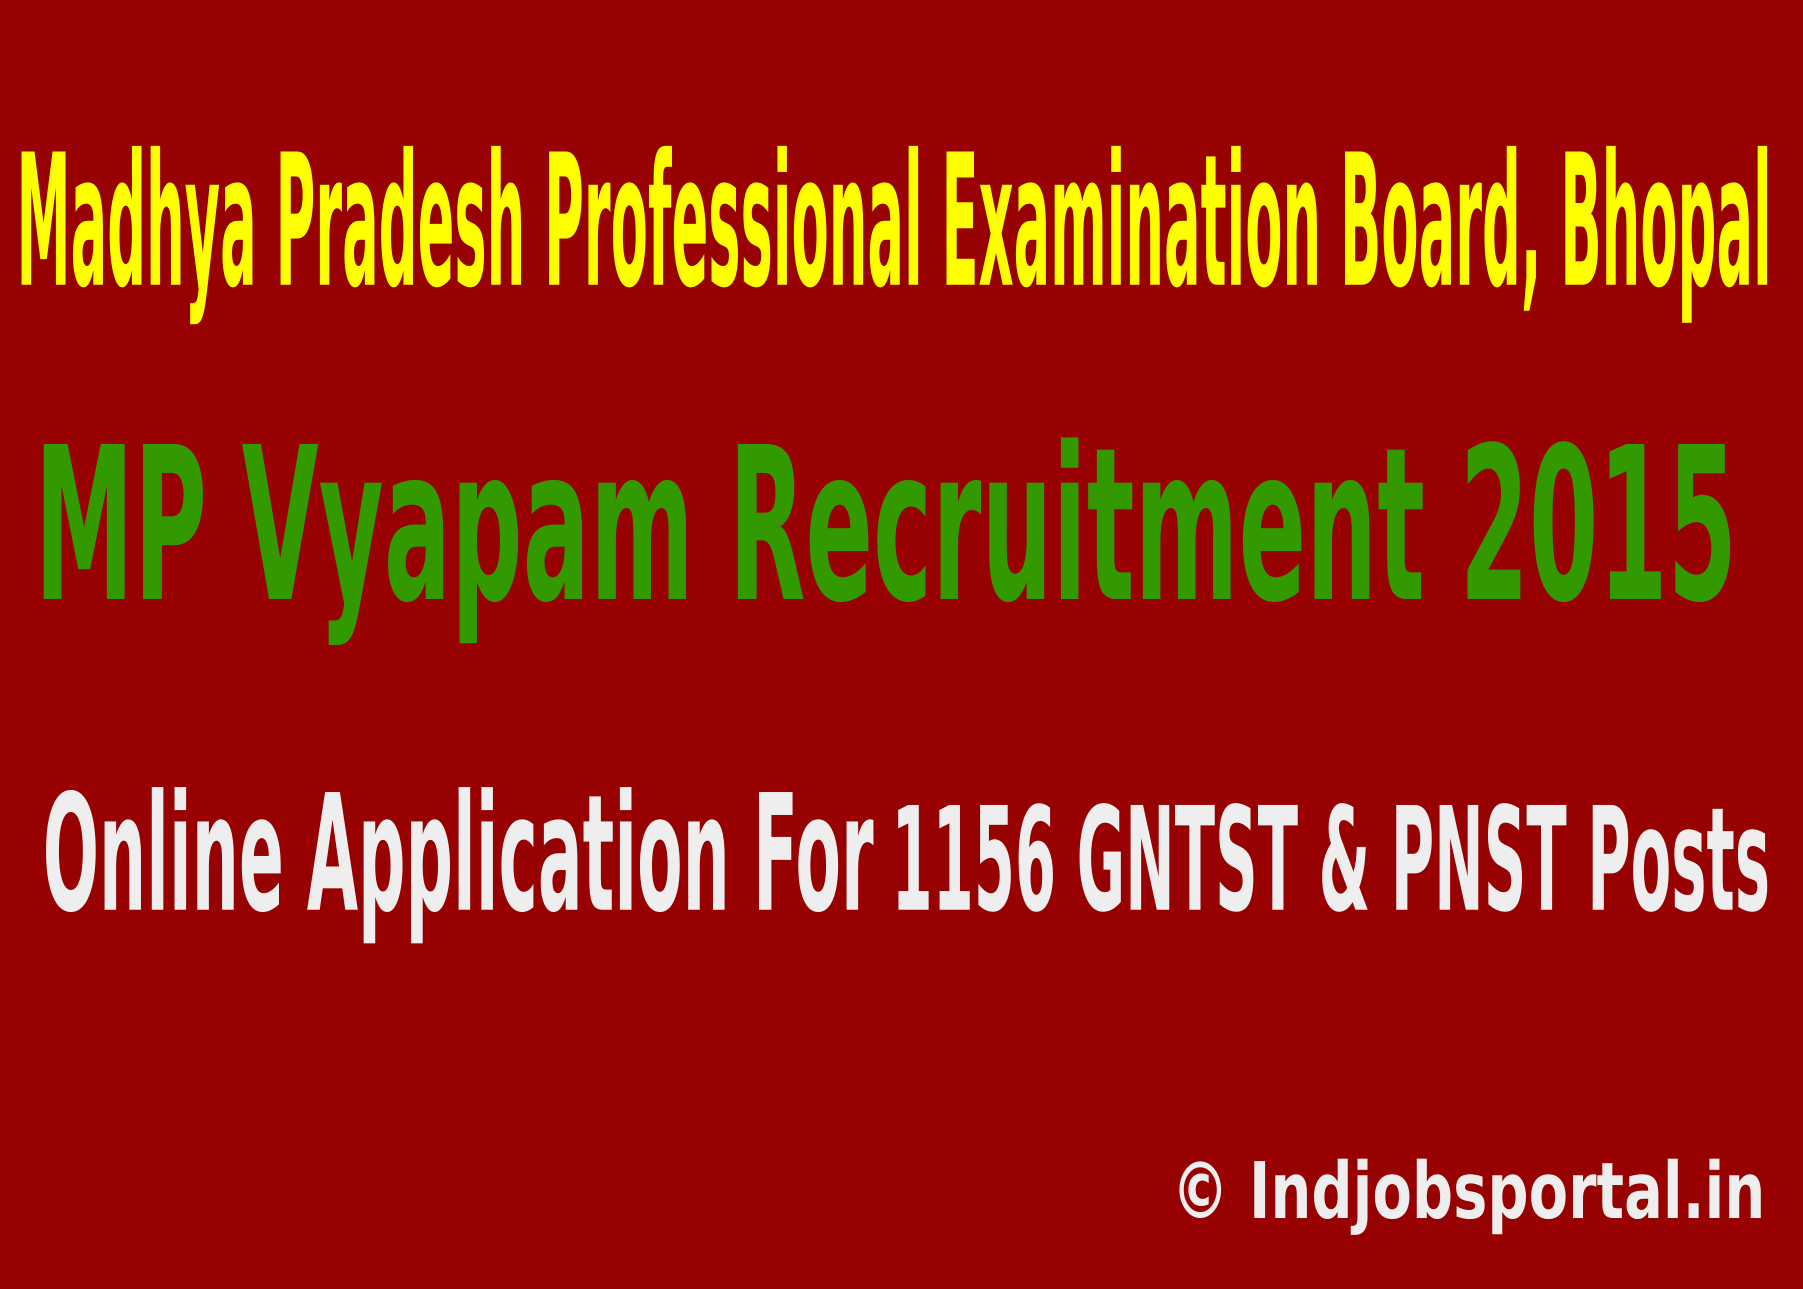 MP Vyapam Recruitment 2015 Online Application For 1156 GNTST & PNST Posts